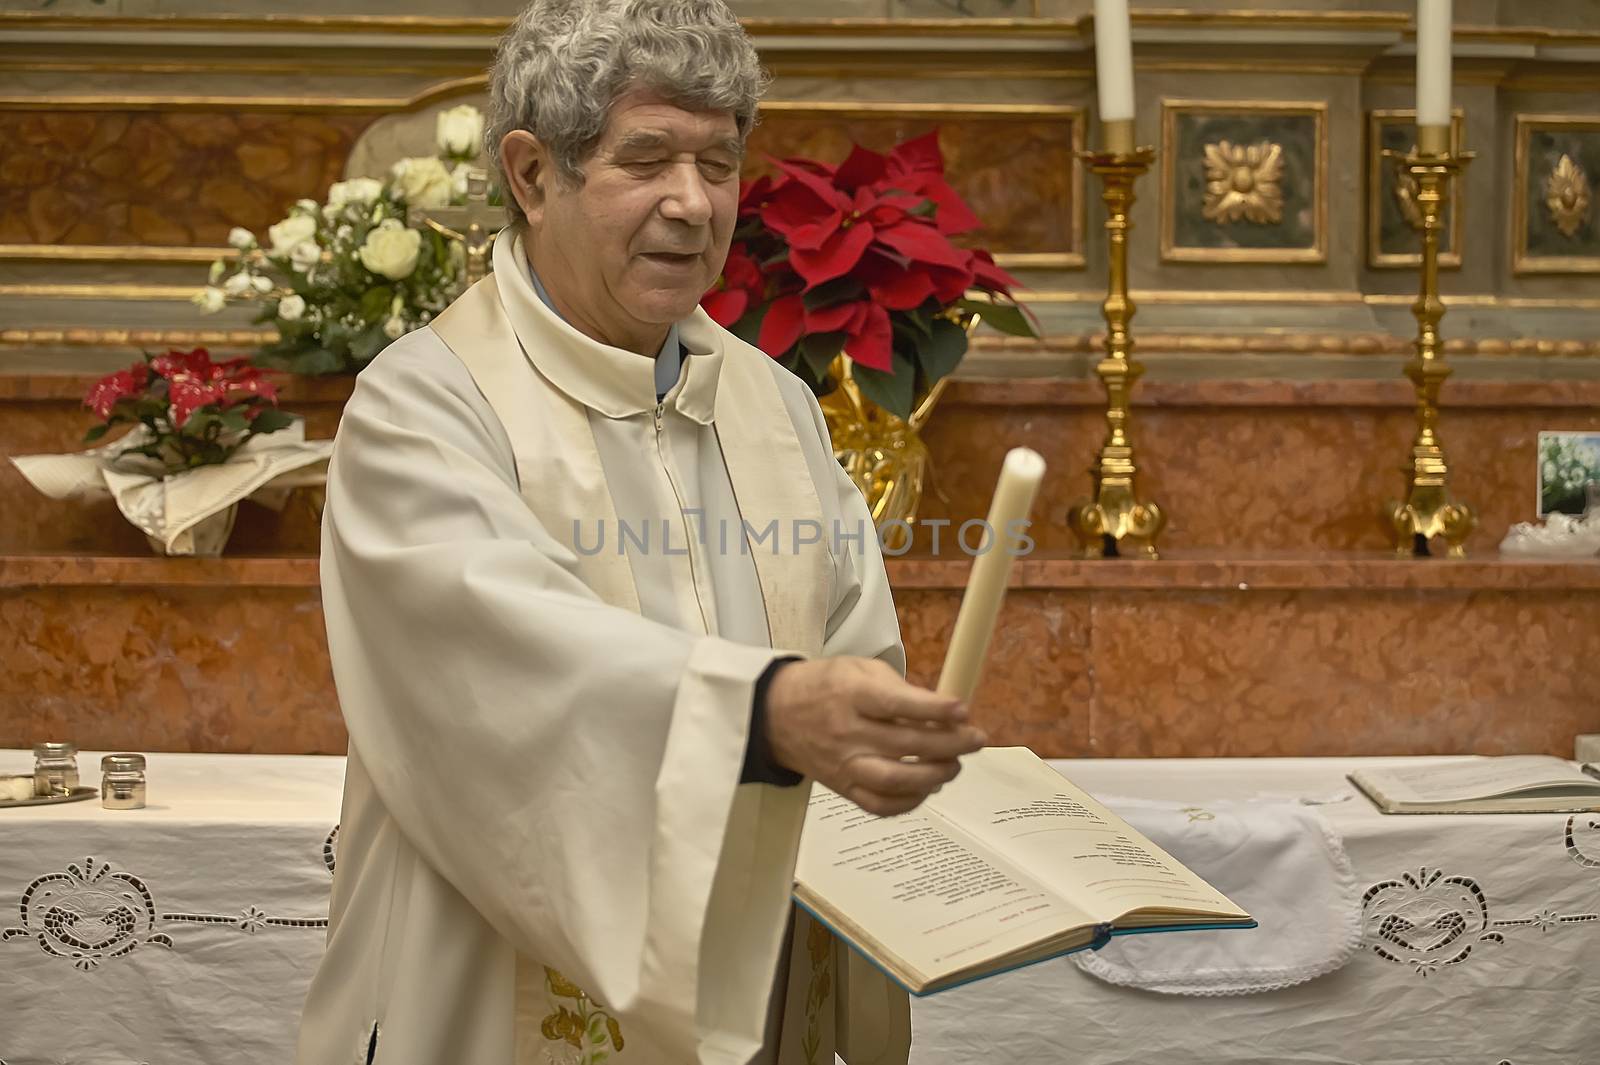 Priest gives the candle to baptism, symbol of a part of the Christian ceremony